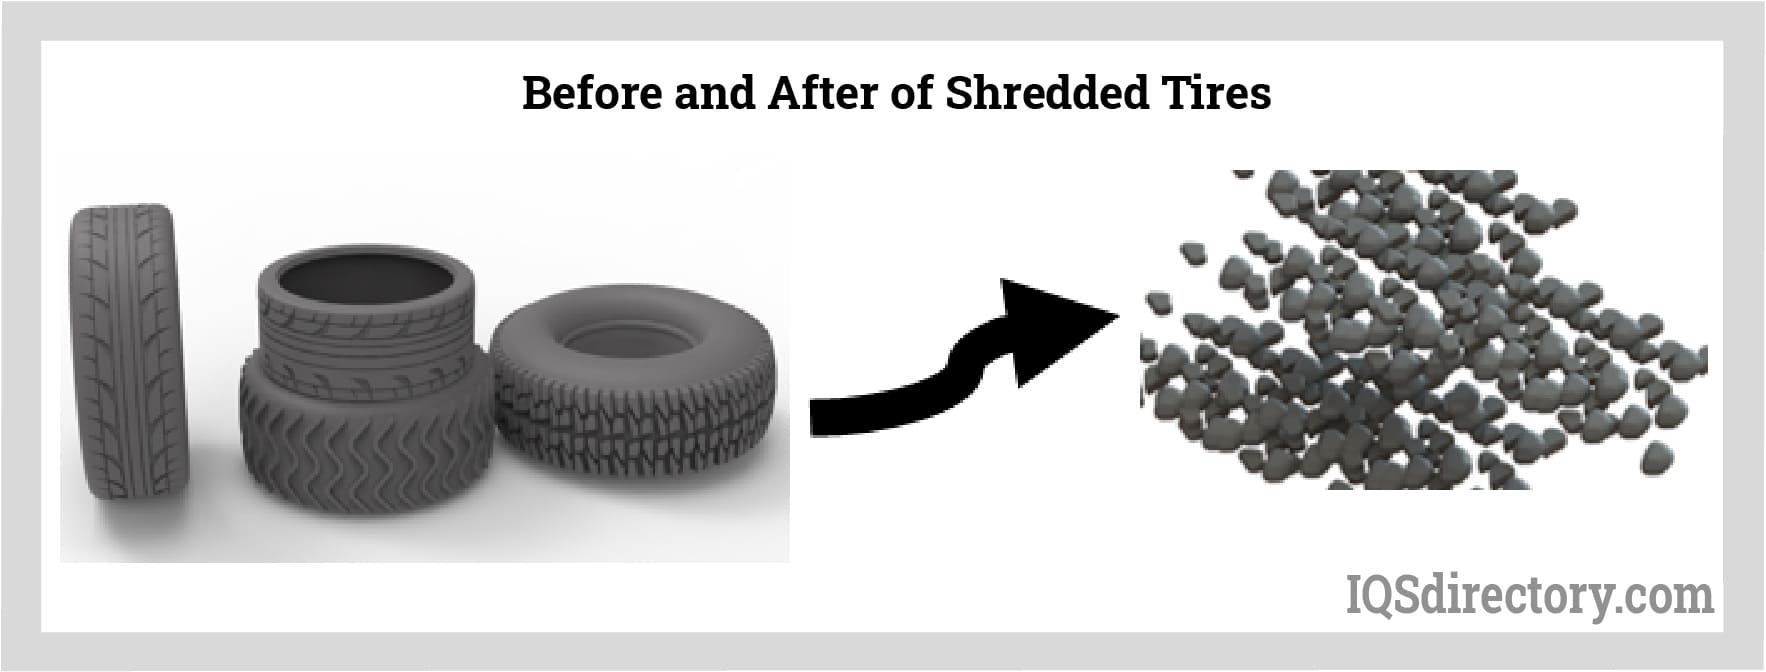 Before and After of Shredded Tires